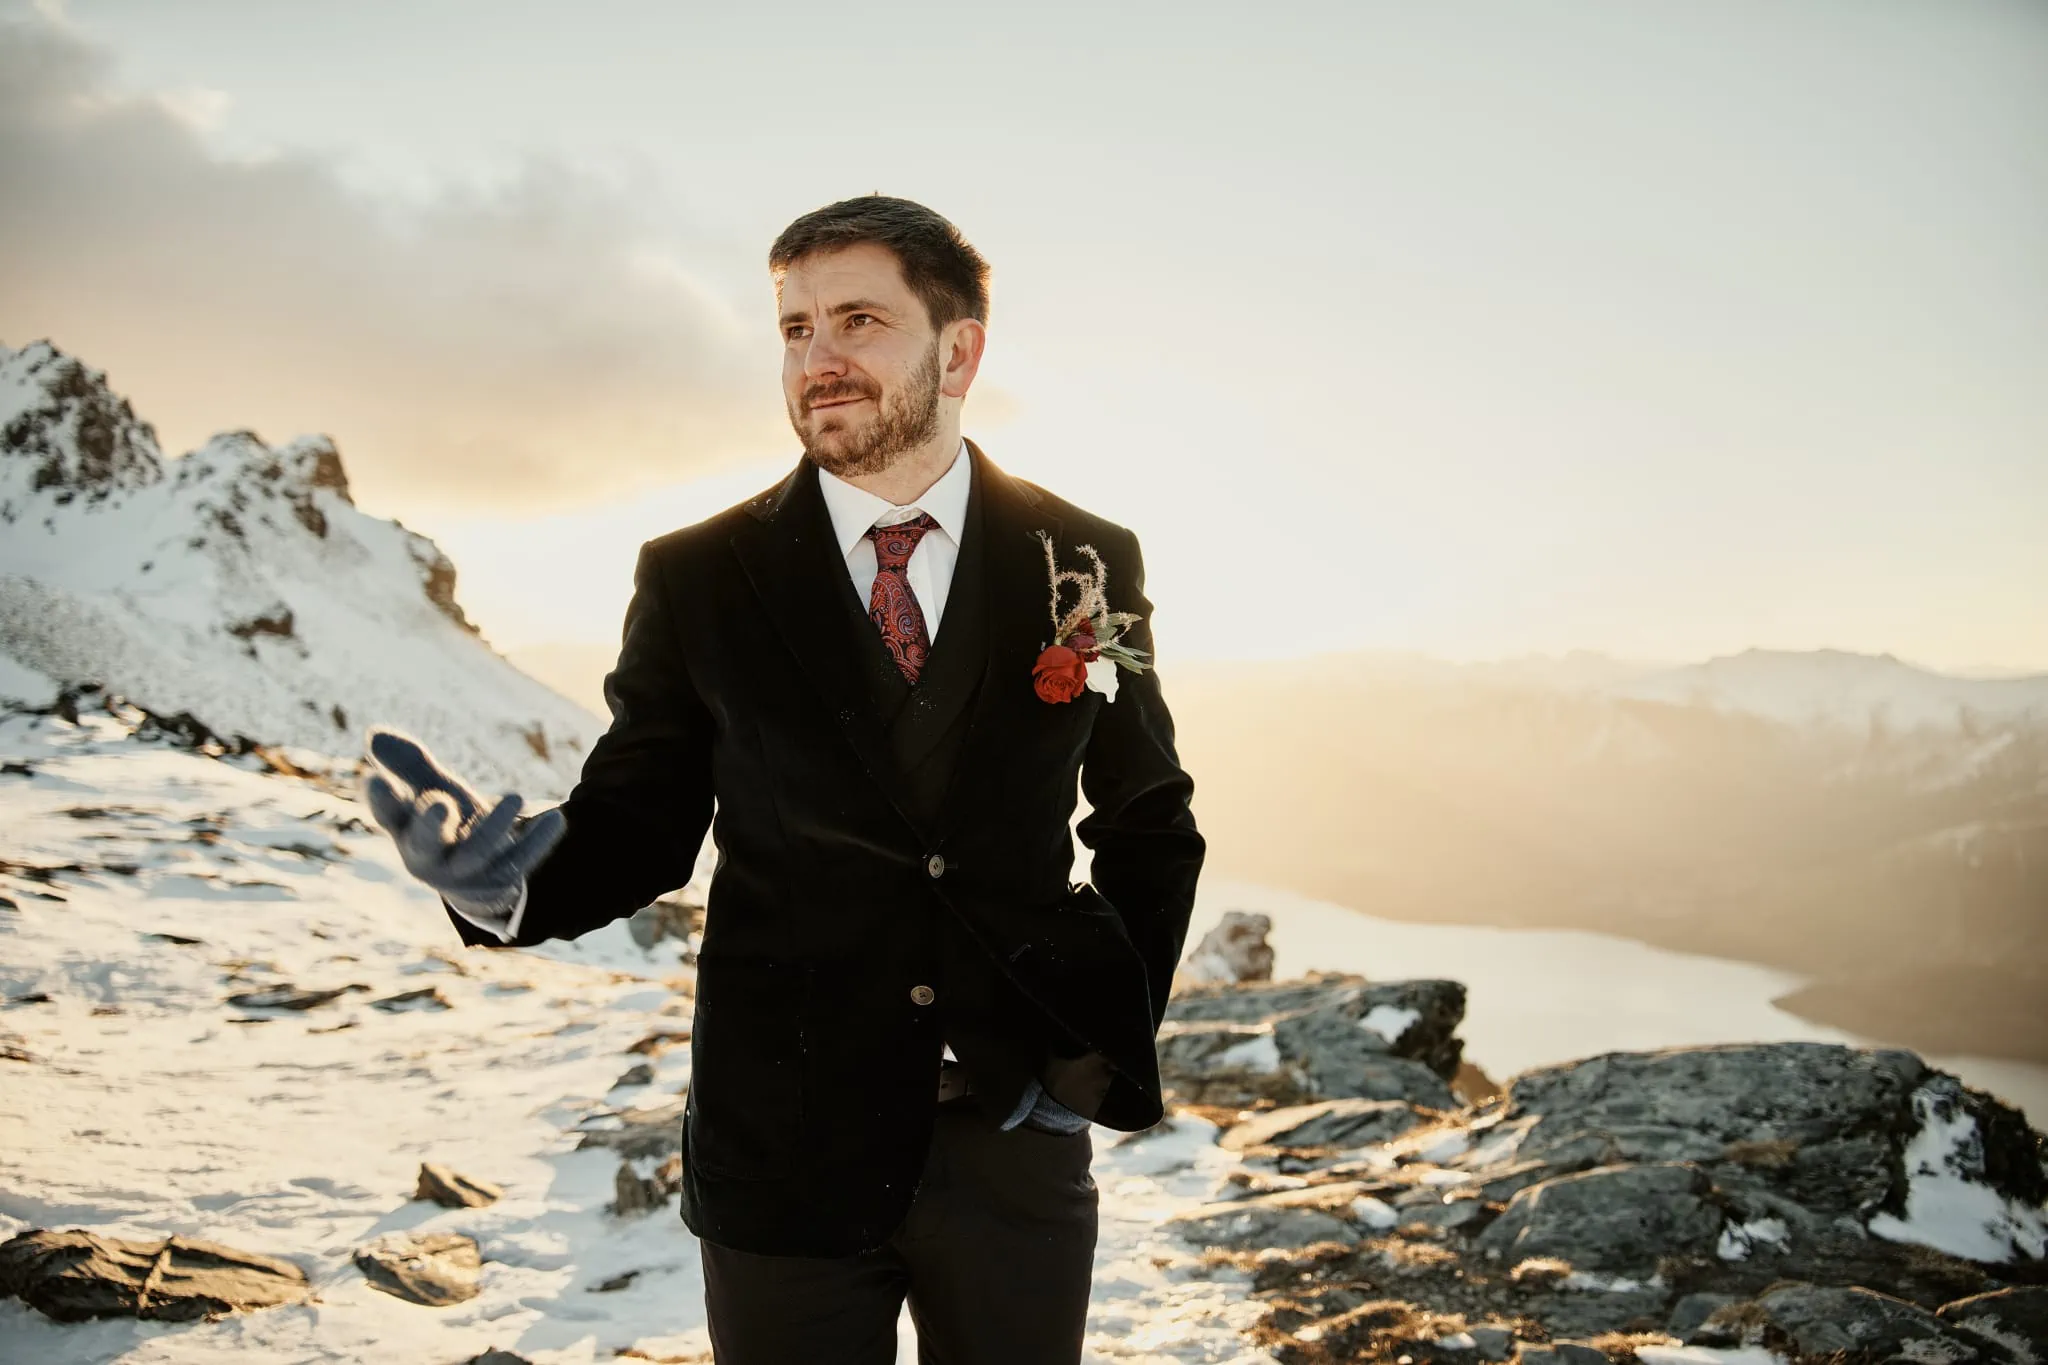 A man in a suit standing on top of a snowy mountain during Claire and Rob's heli elopement wedding at Cecil Peak.